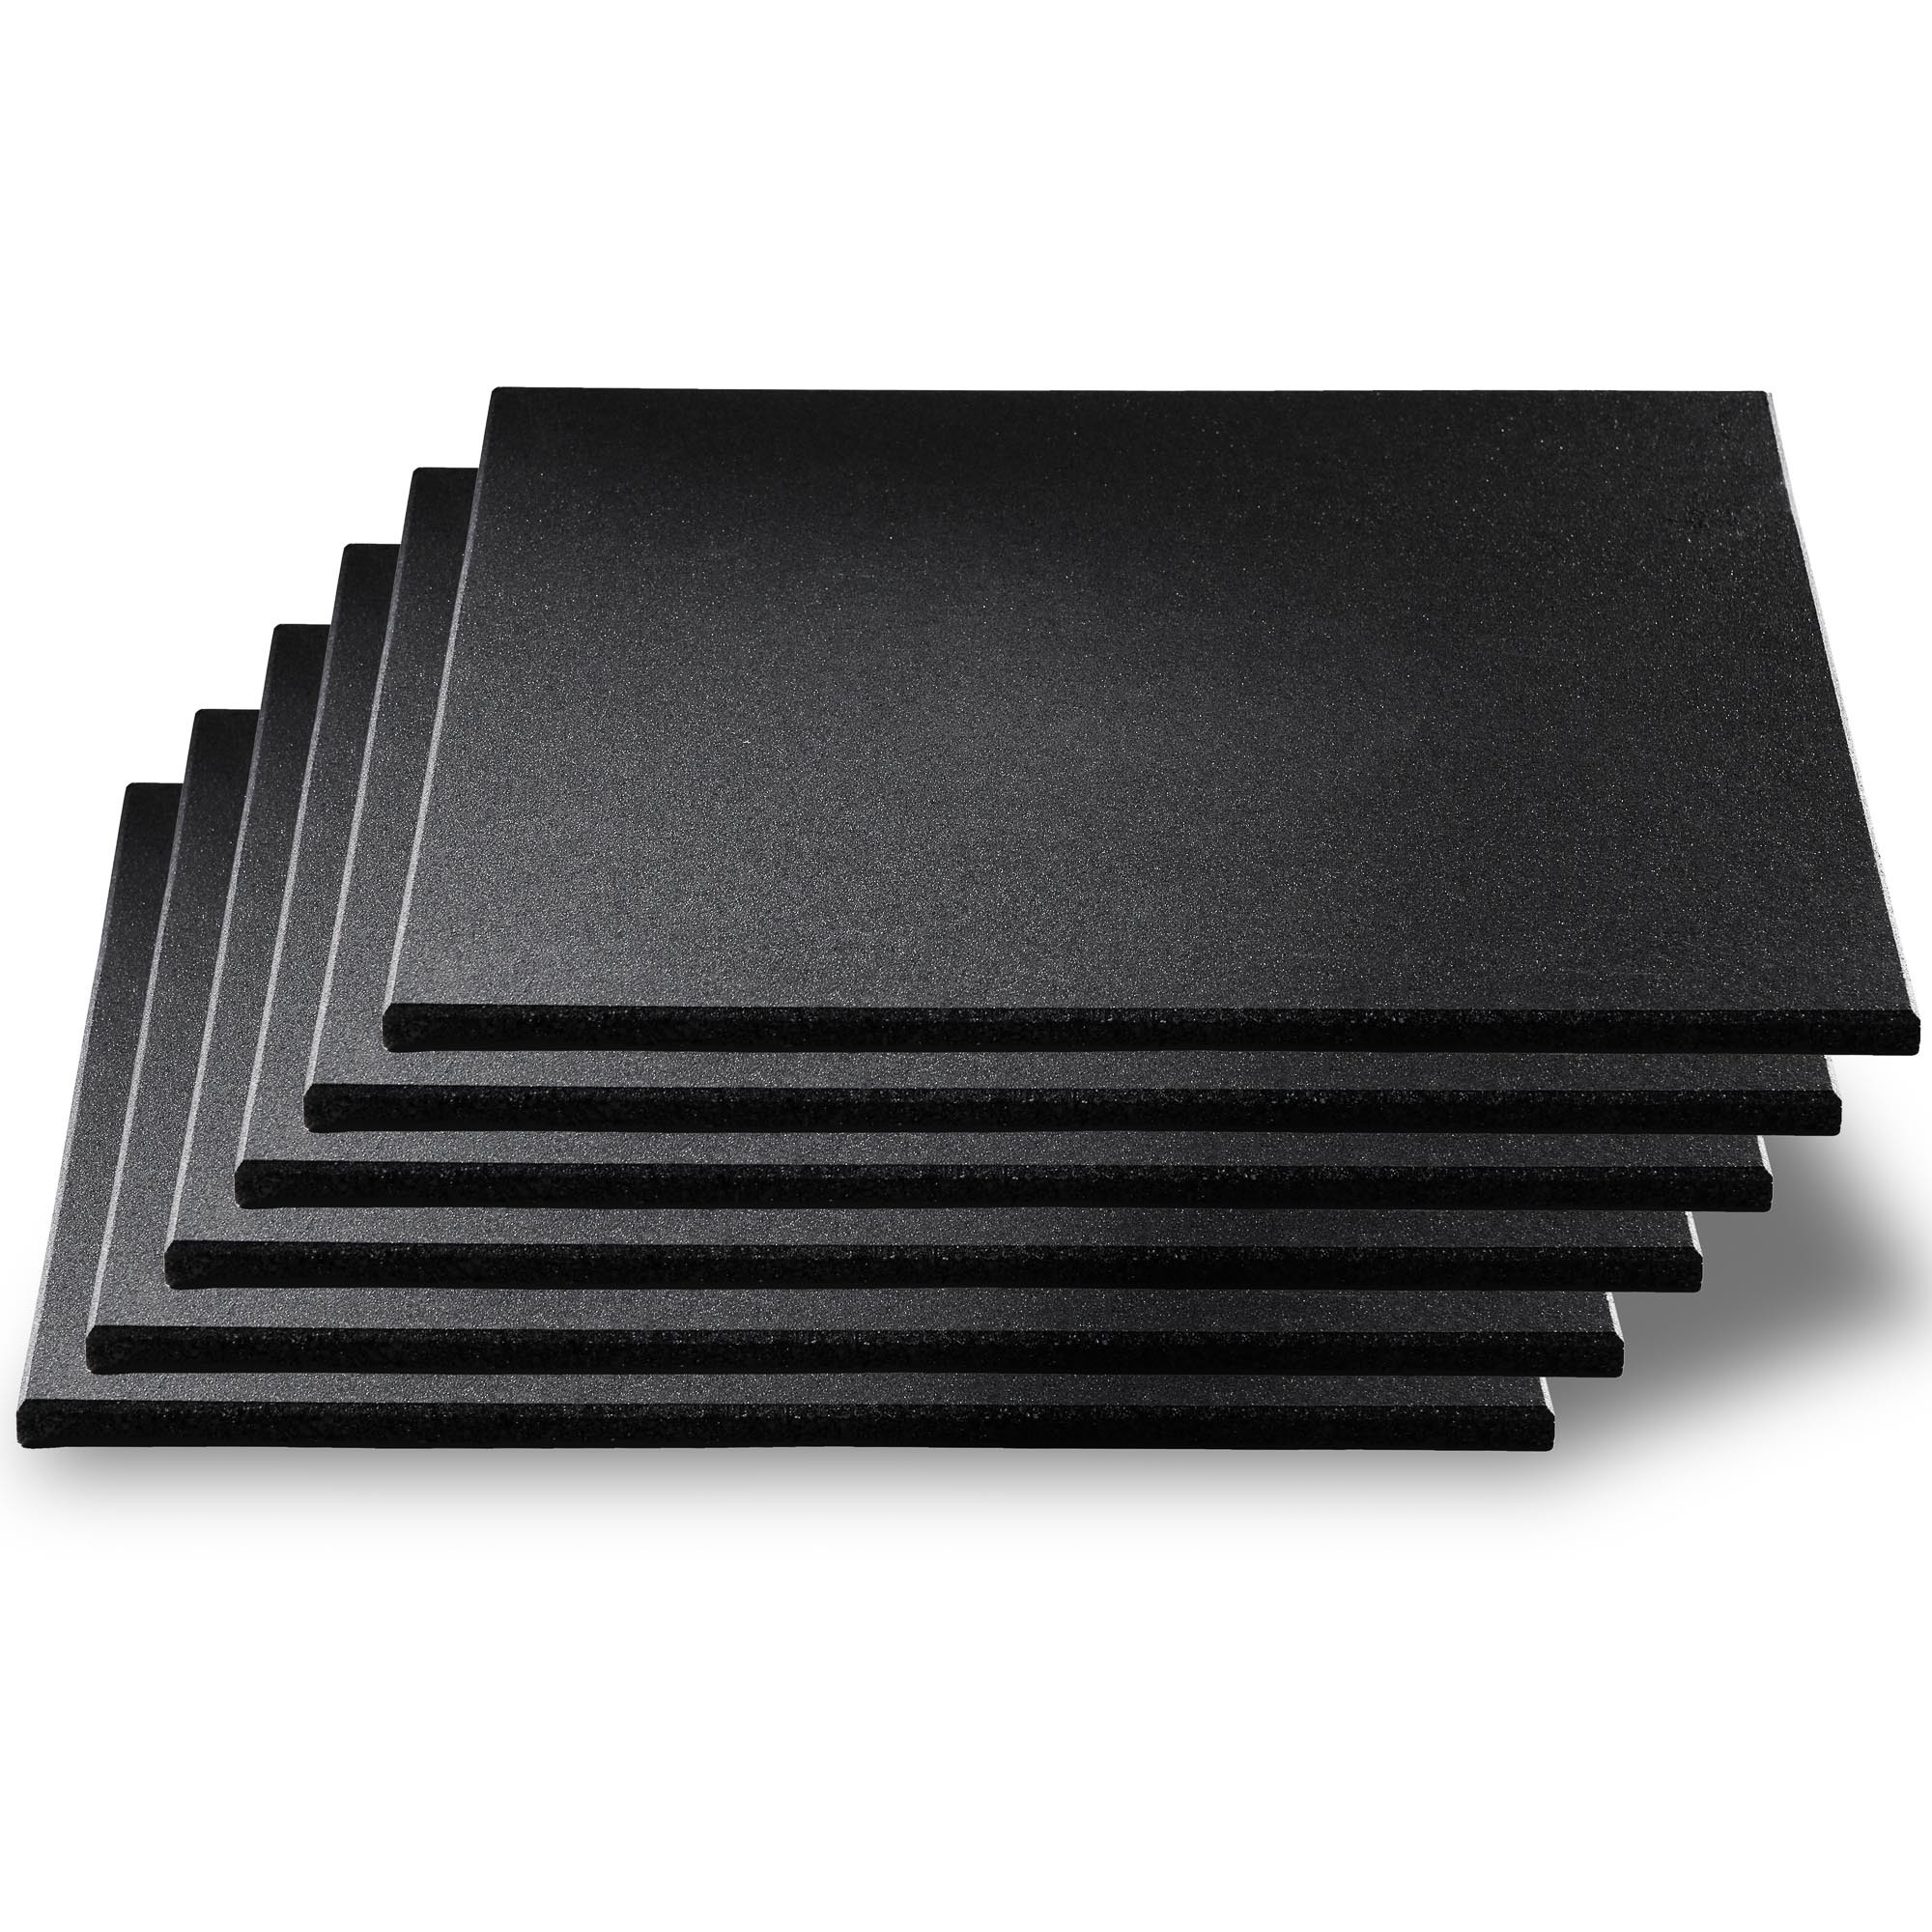 CD 15mm Thick High-Density Gym Floor Protection Mats Tiles - 6 Pack 500x500mm Rubber Exercise Workout Equipment Mat - Noise & Shock Absorbing - Black